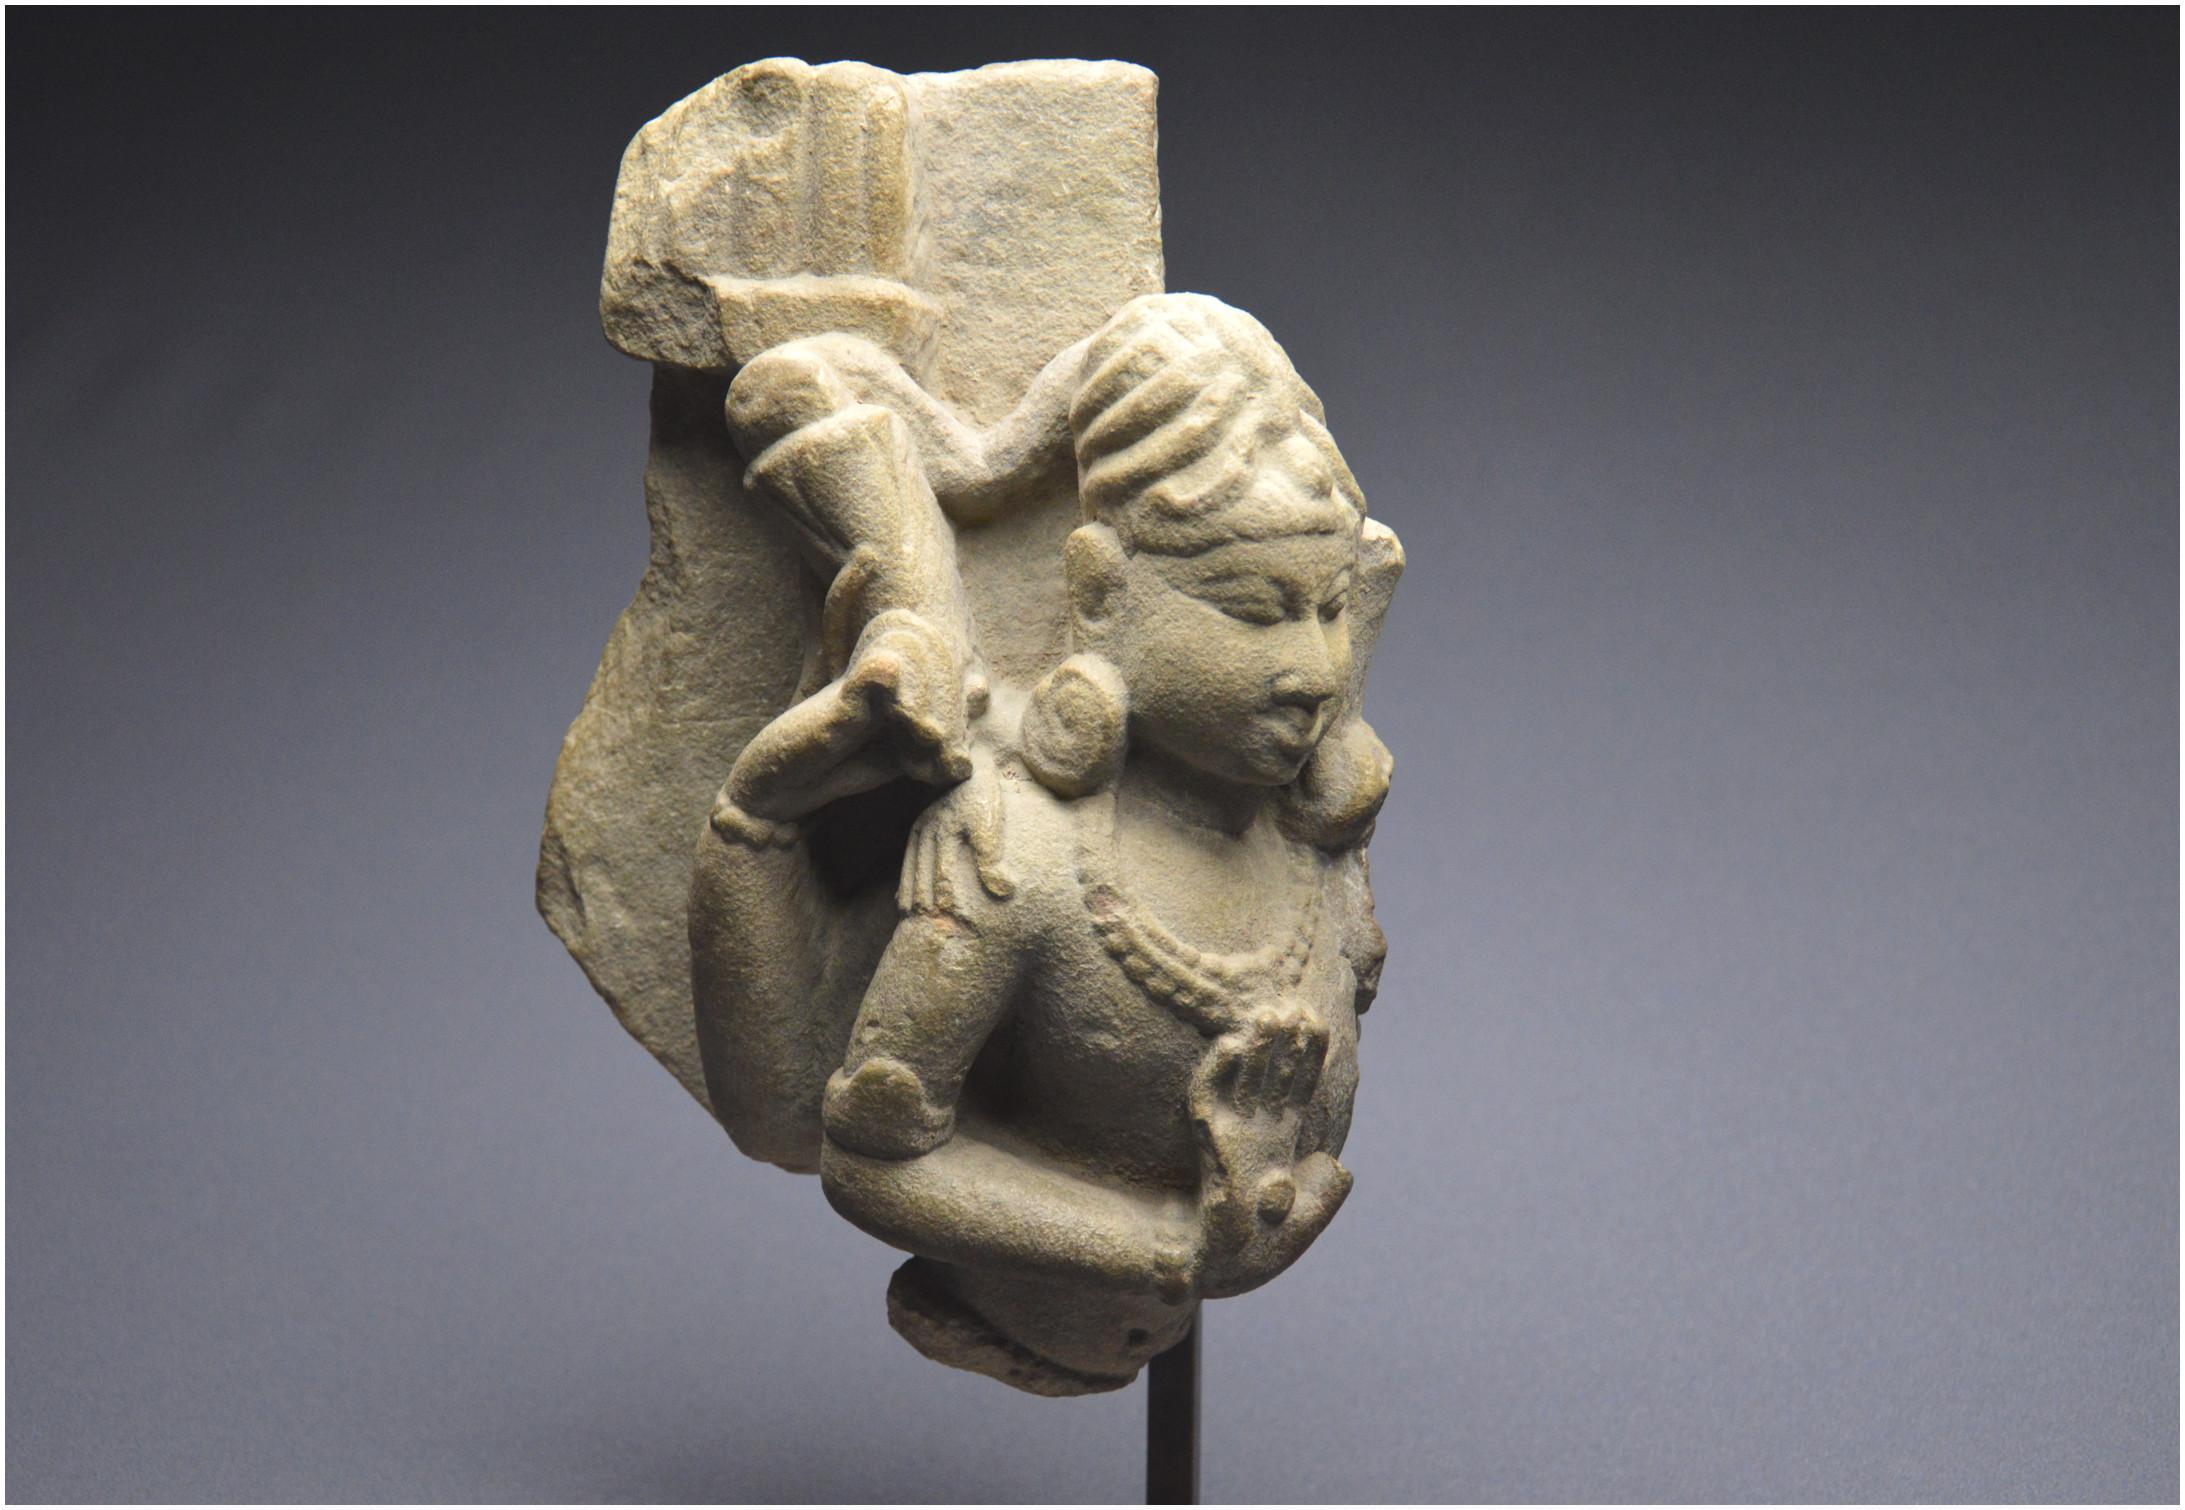 Origin: India
Period: 11th century
Material: Sandstone
Dimensions including stand: 18.5 x 32.5 cm
Condition: Visible accidents and losses
Provenance: French collection from the 70s

Fragment of a sandstone stele depicting the Hindu deity